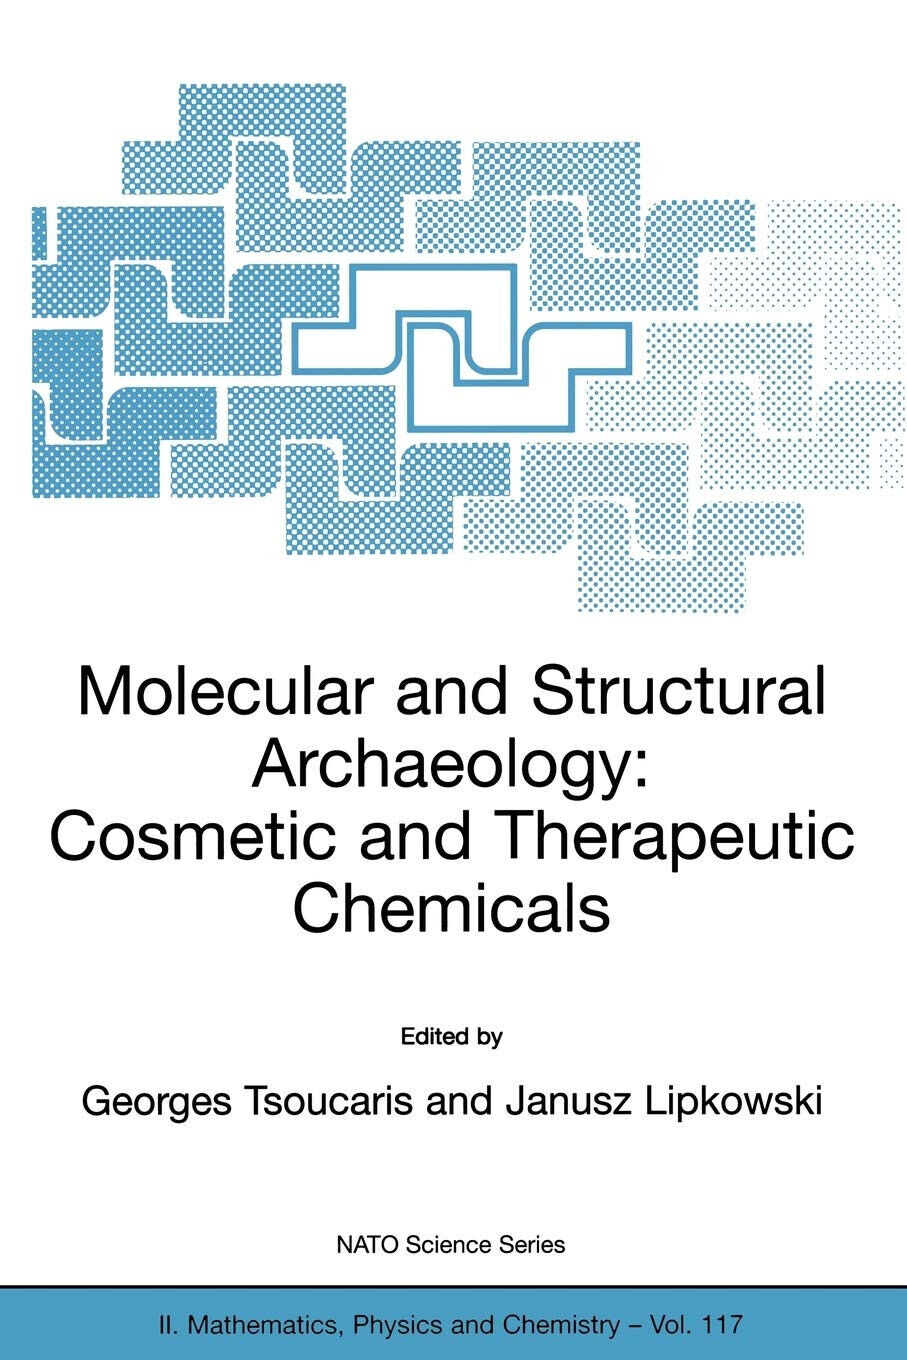 Molecular and Structural Archaeology: Cosmetic and Therapeutic Chemicals - 2008 libro usato